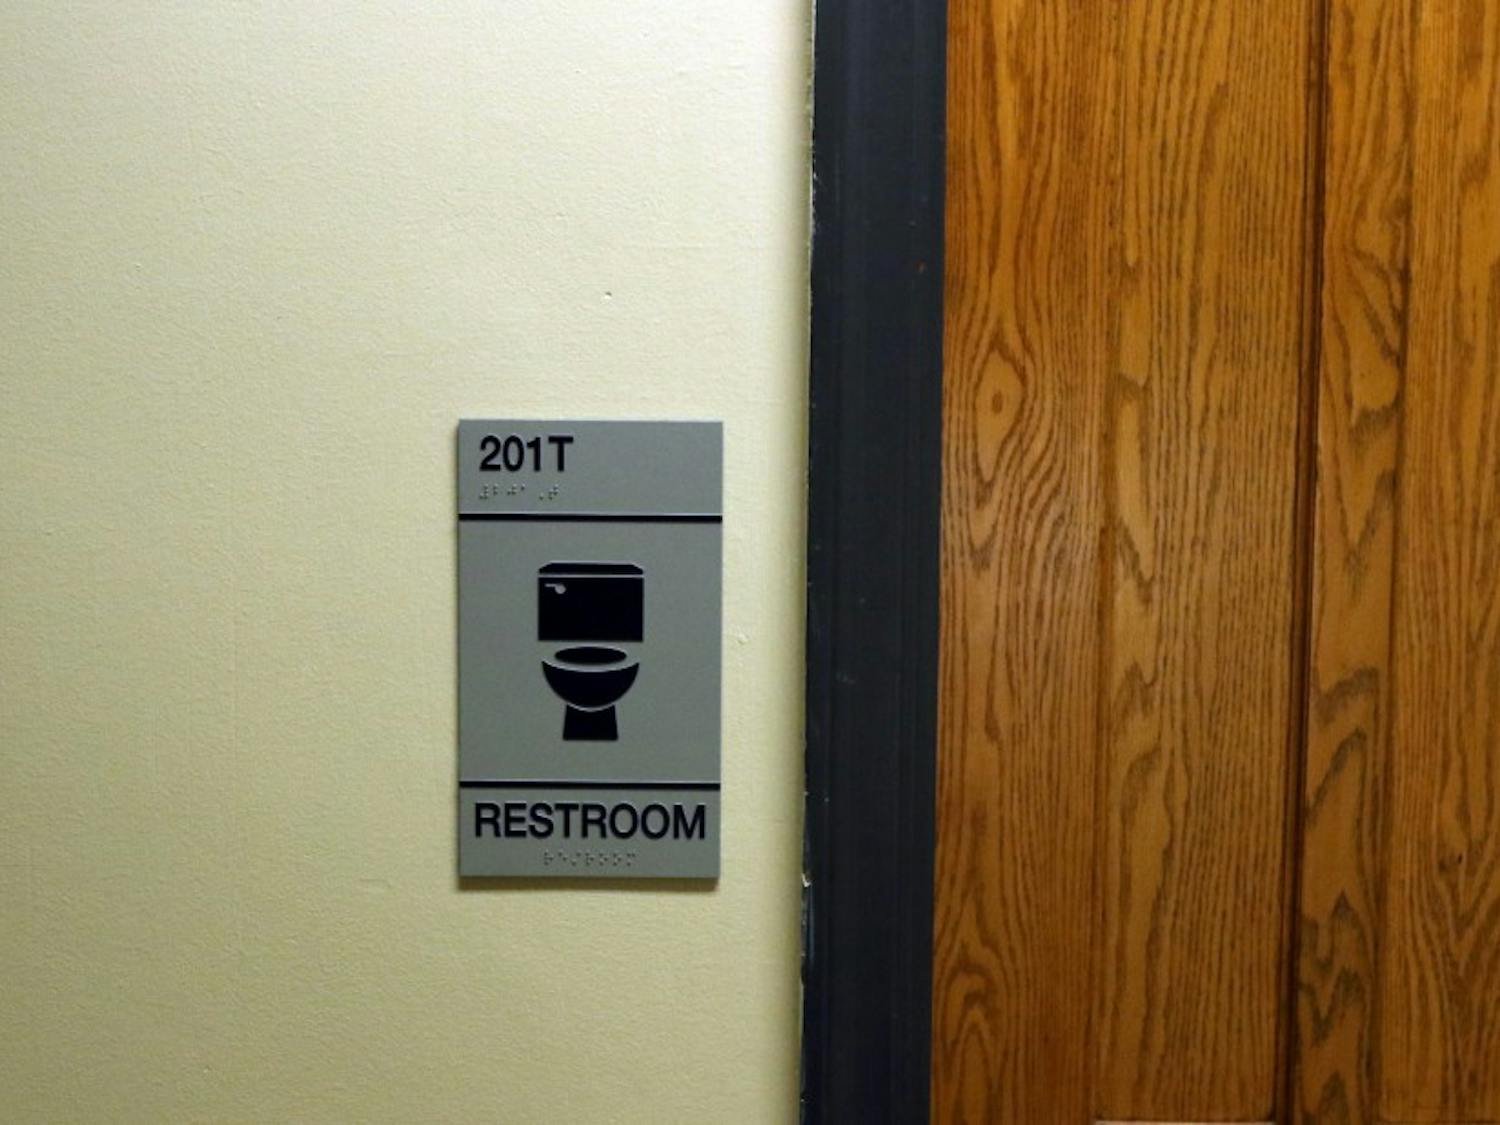 There are now gender-neutral bathrooms in Perkins Library, the Bryan Center and most residence halls.